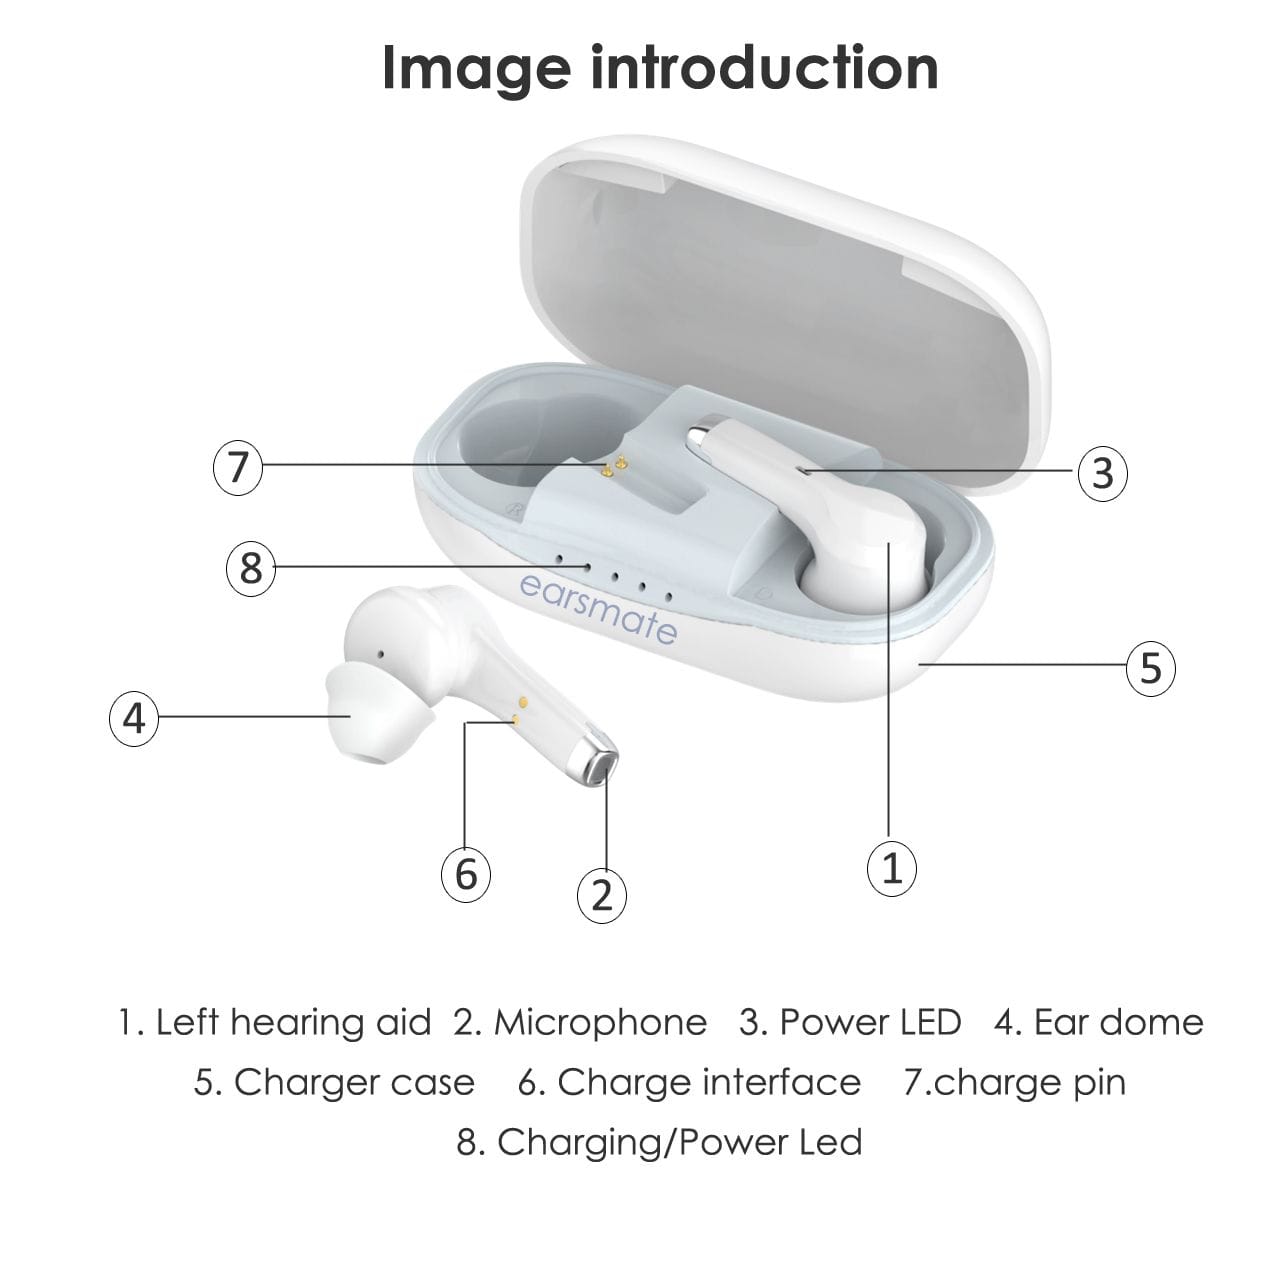 YES, IT'S HEARING AIDS! 2 in One, Hearing Aids and Bluetooth Airpods type Headphones.  eEAR®-AP-TWS-001 Airpod style hearing aids, very discreet, doesn't look like typical hearing aids rather it looks like fashionable Airpods Bluetooth